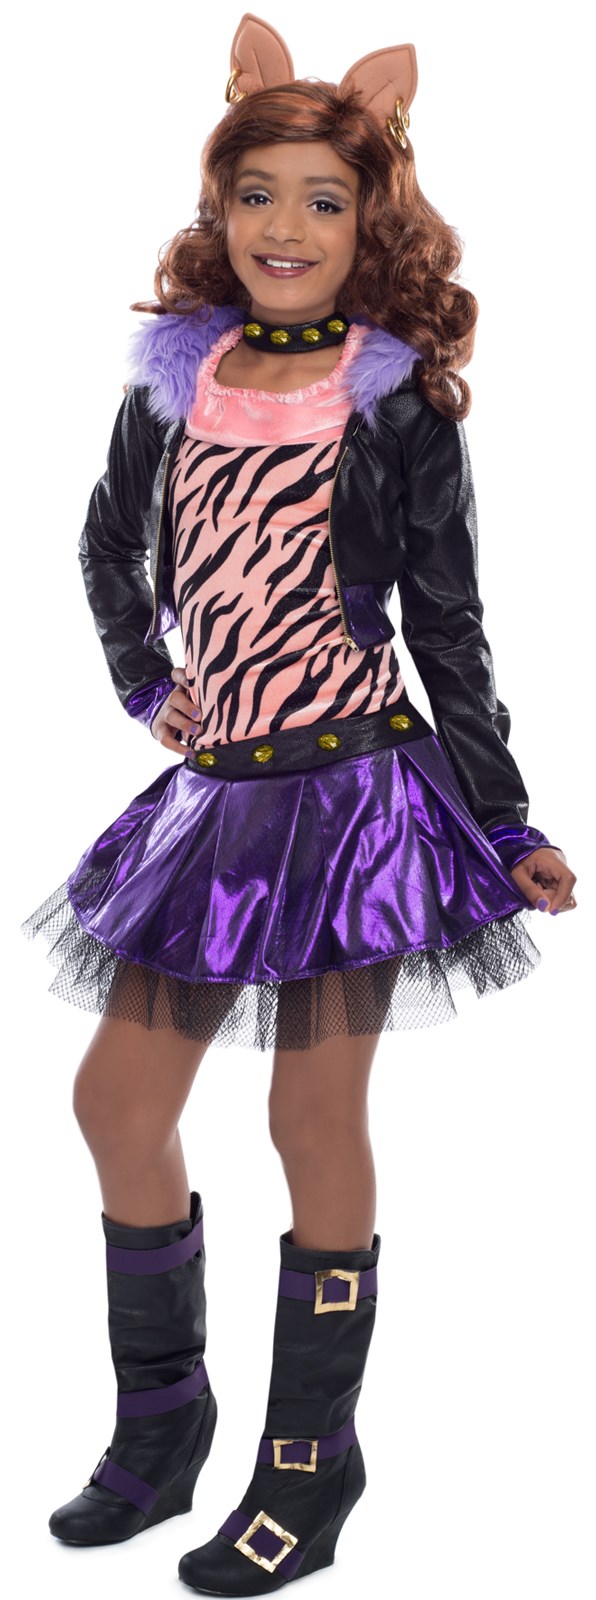 Deluxe Monster High Clawdeen Wolf Costume